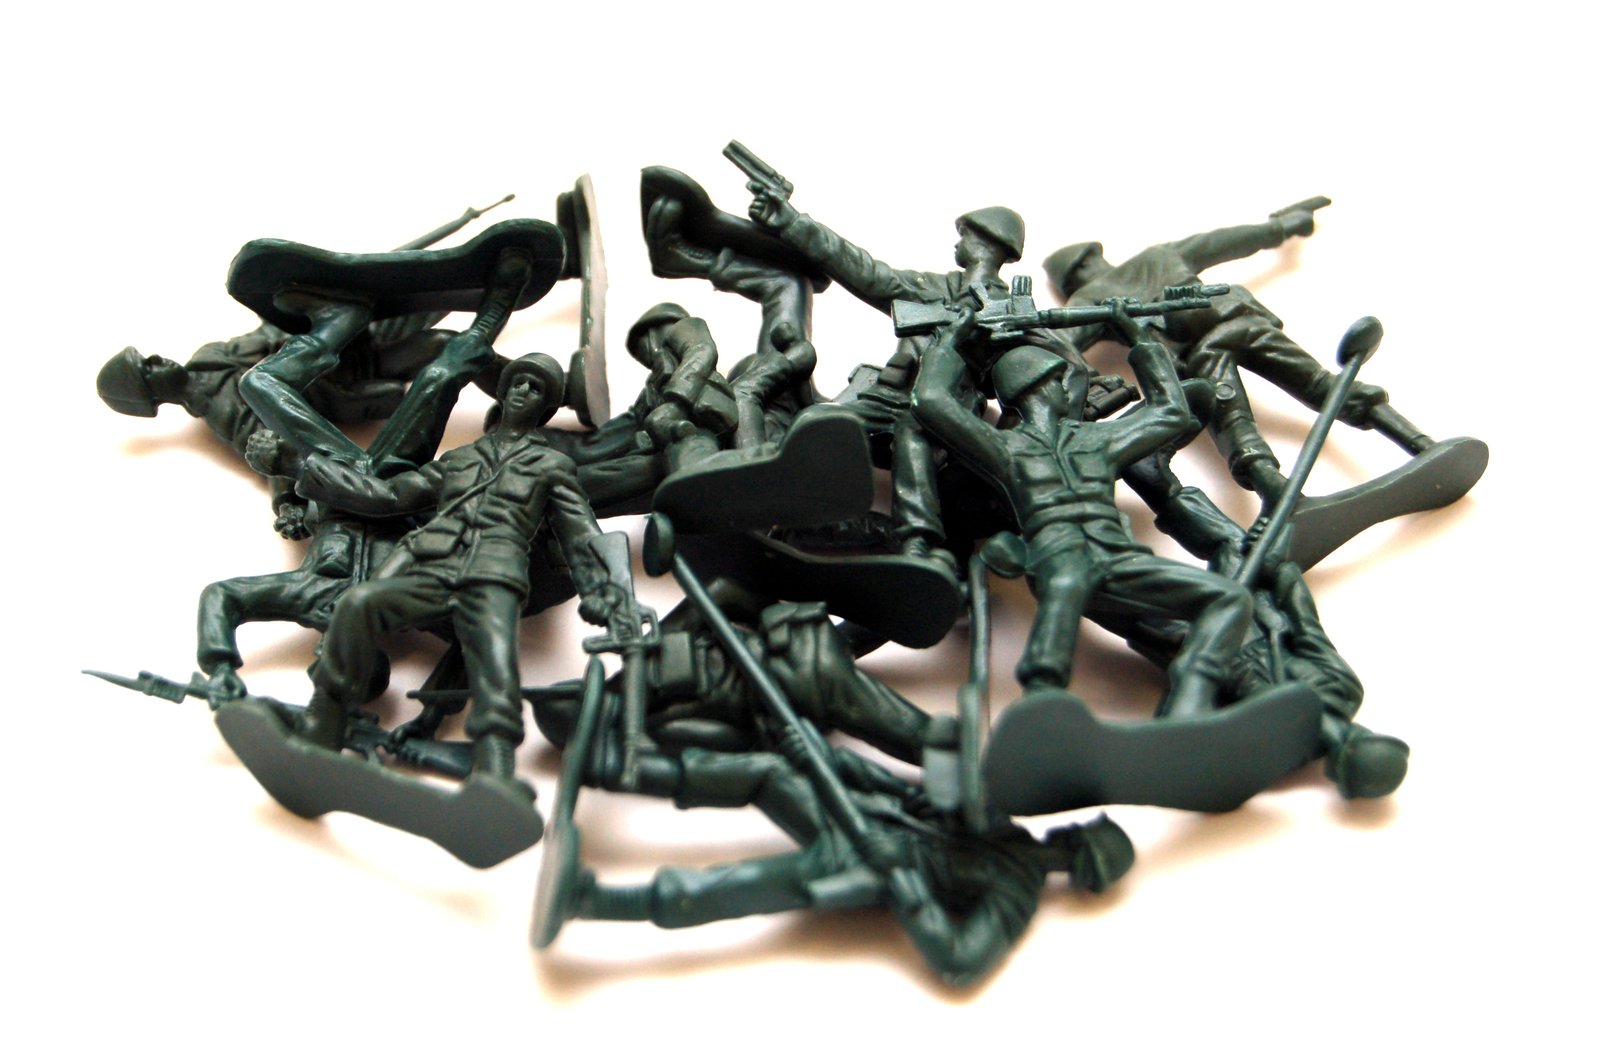 small toy soldiers are shown on the table